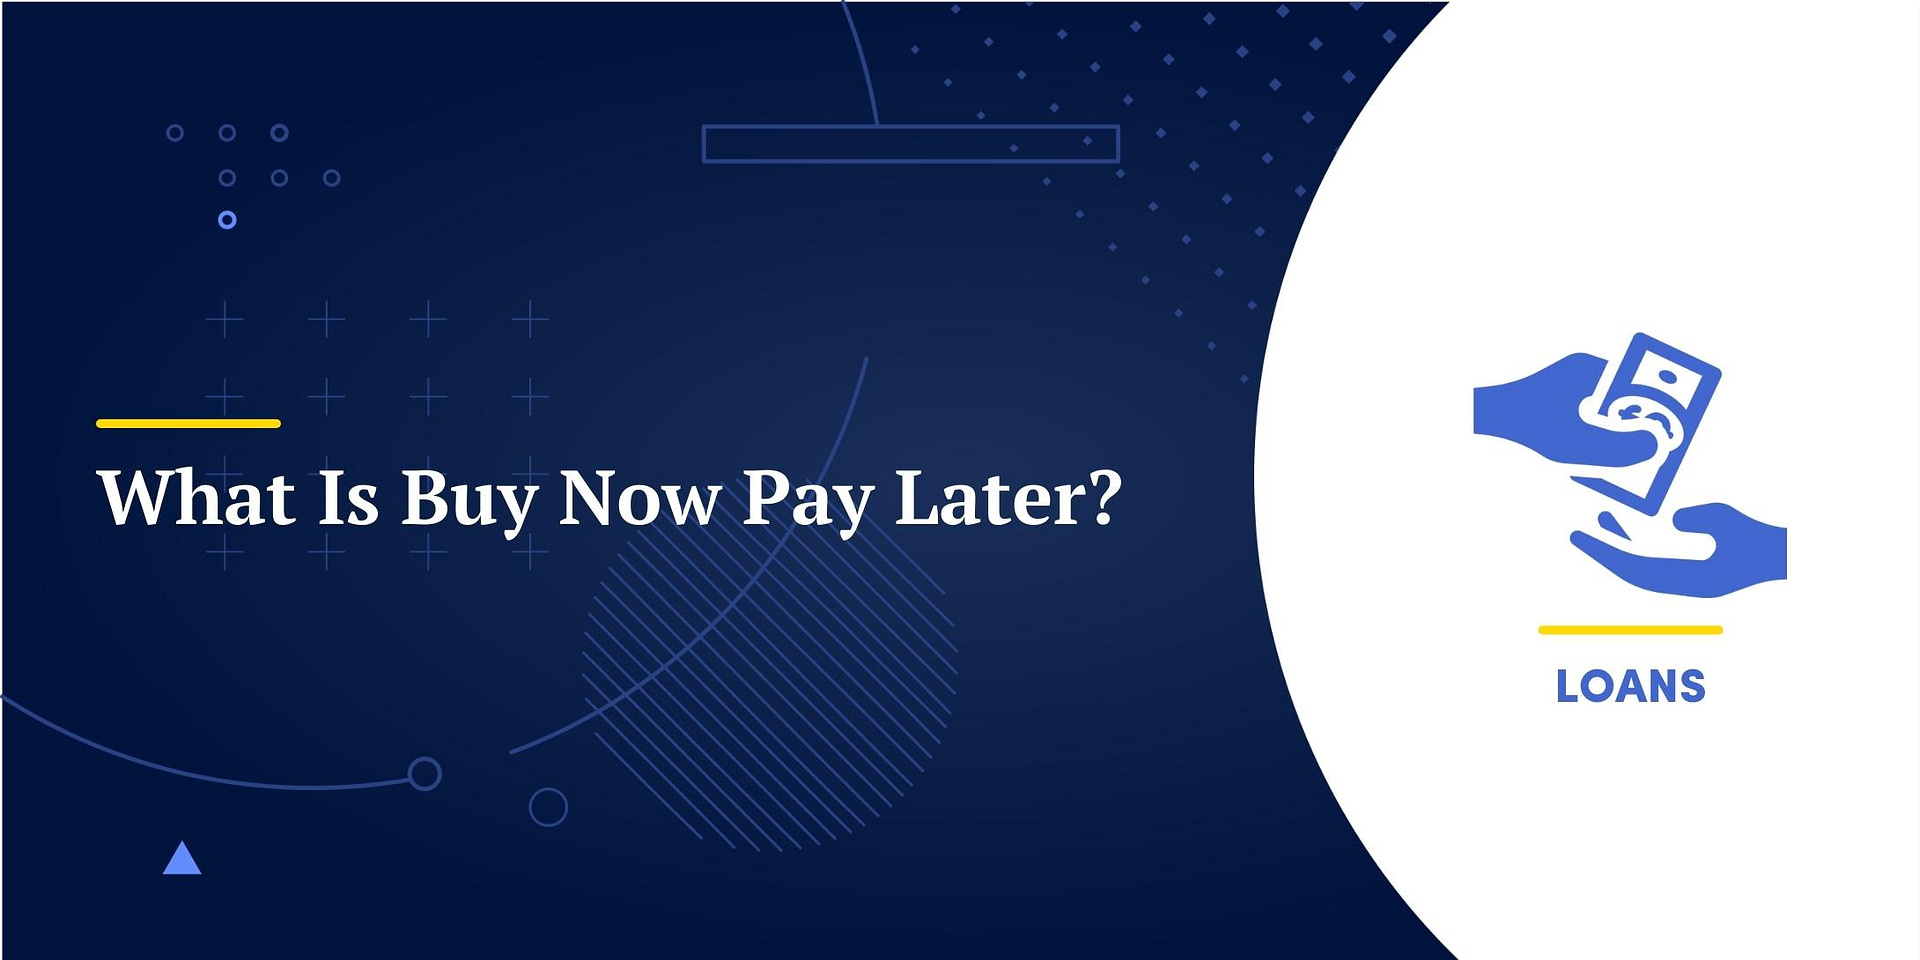 Buy Now, Pay Later (BNPL): What It Is, How It Works, Pros and Cons